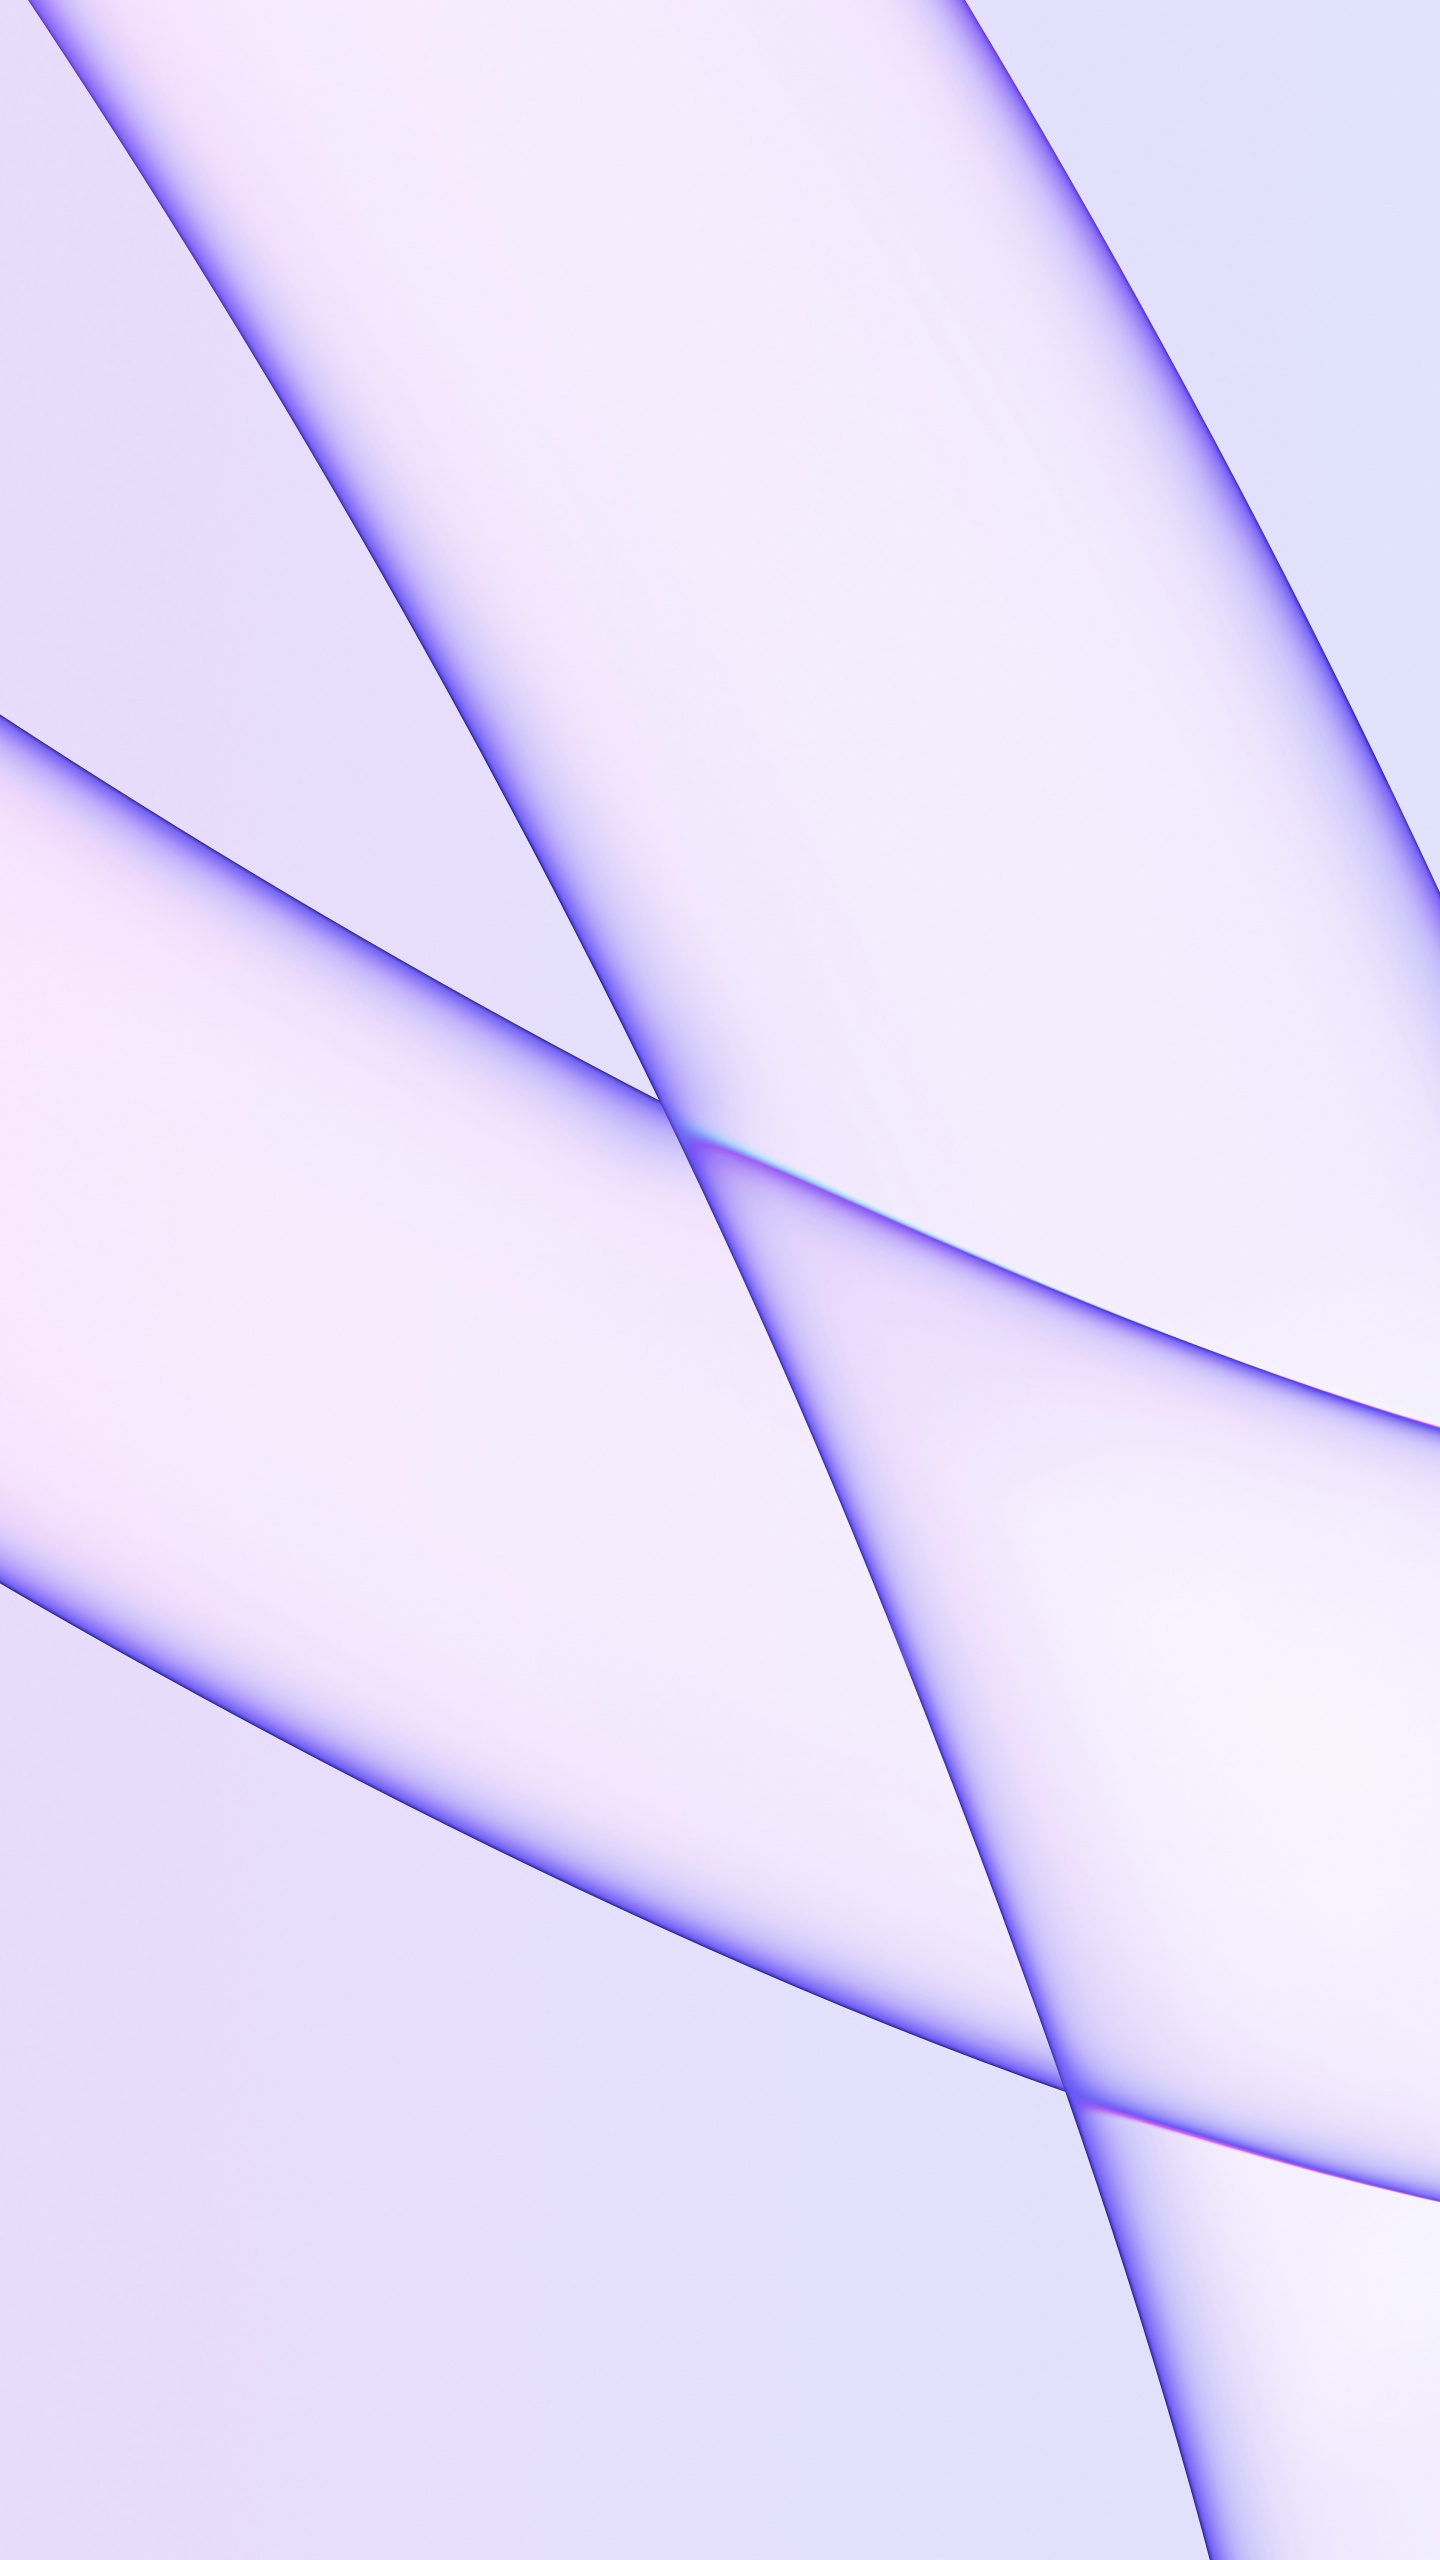 IMac Color Matching Wallpaper in Light Purple for IPad or Desktop. Wallpaper in 1440x2560 Resolution